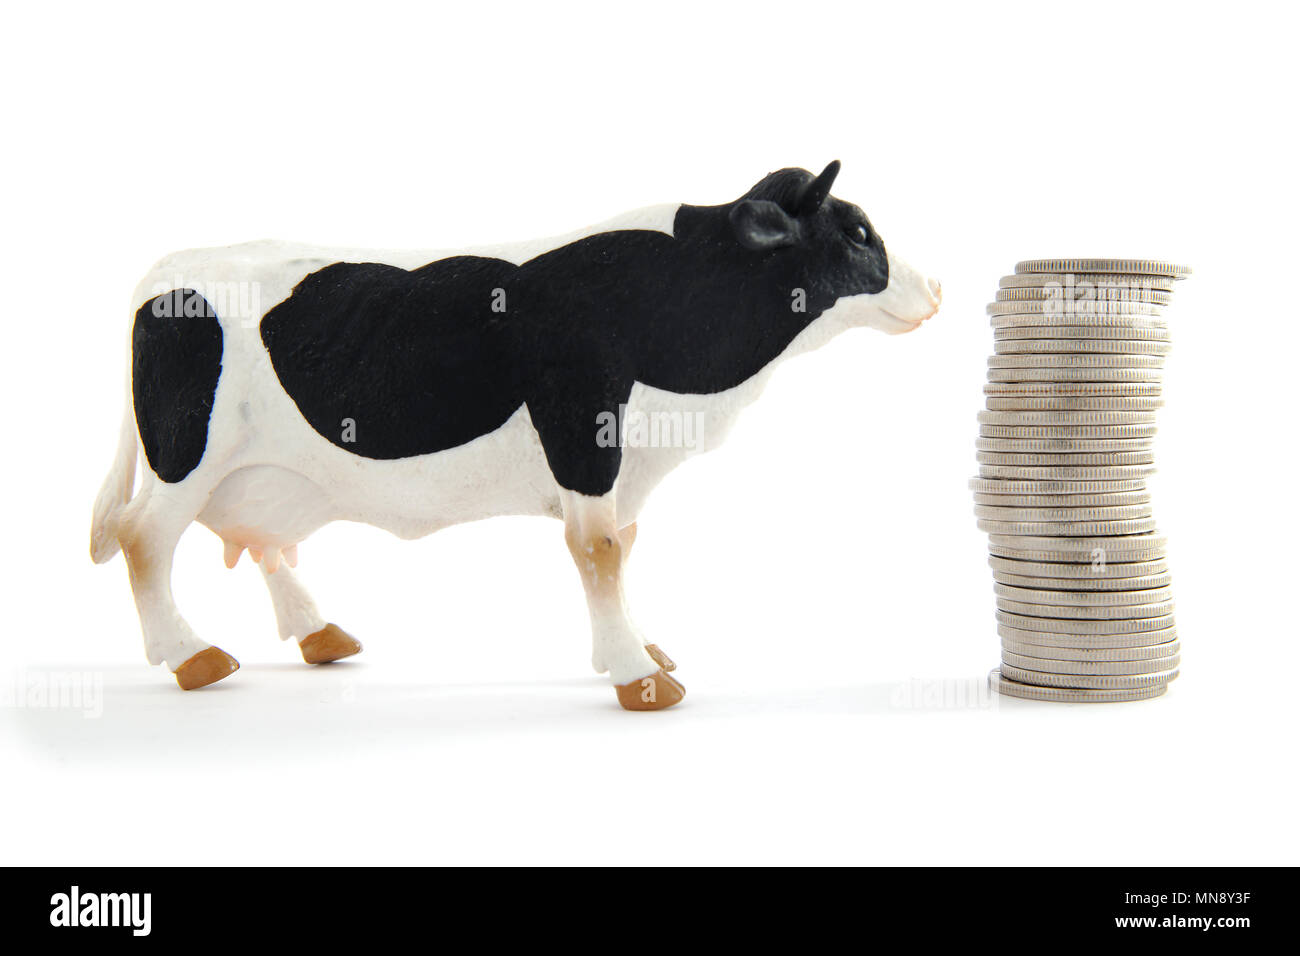 A cow stands next to a pile of money, isolated on white background. Stock Photo